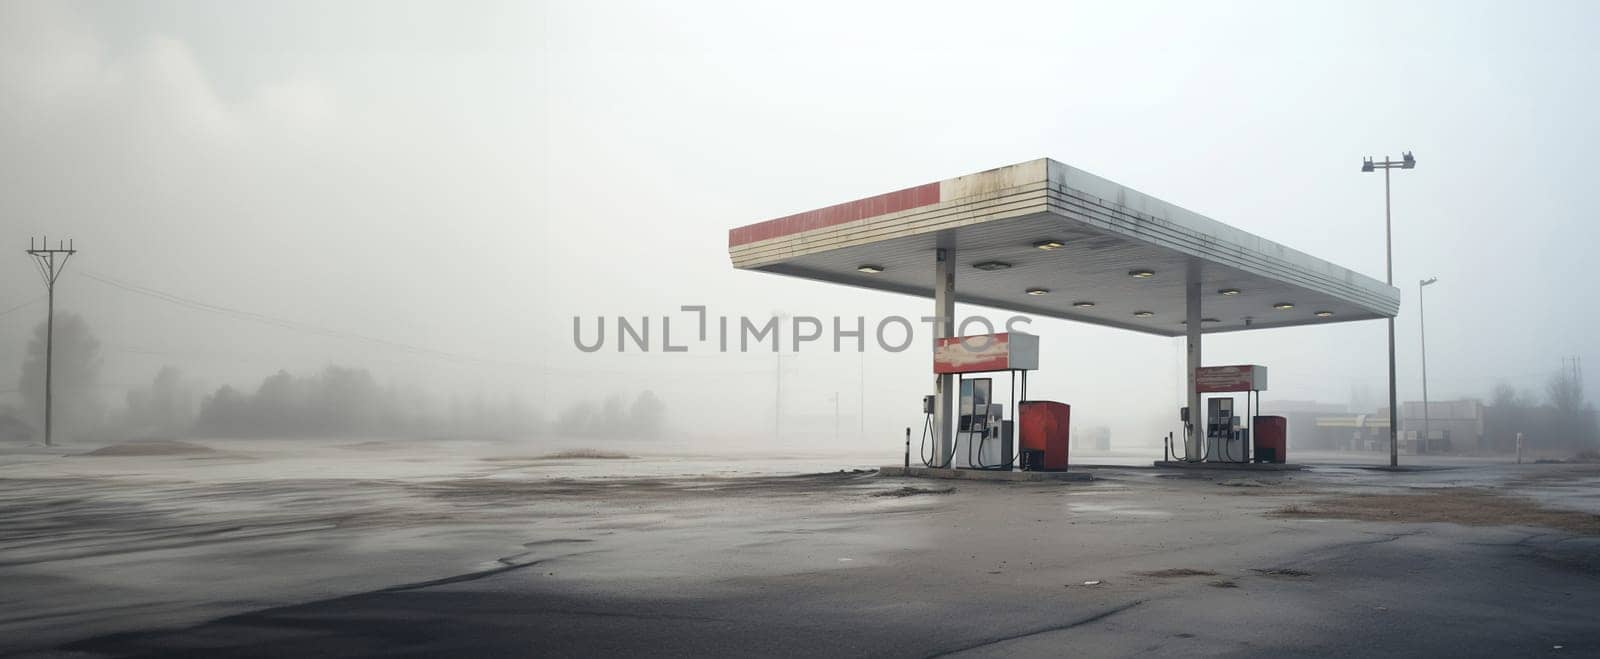 post apocalyptic cityscape, abandoned gas station on a foggy, gray morning, absence of people and cars, energy crisis, High quality photo